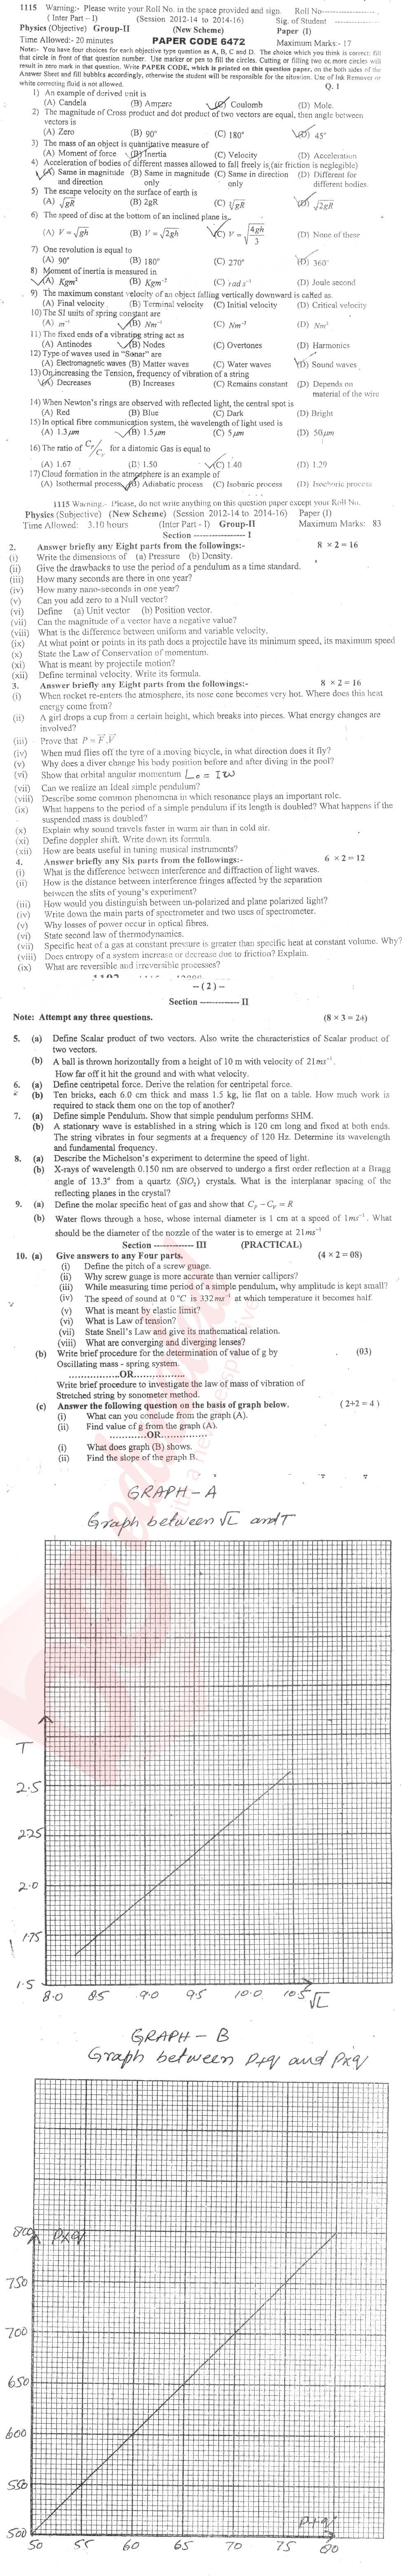 Physics 11th class Past Paper Group 2 BISE Sargodha 2015